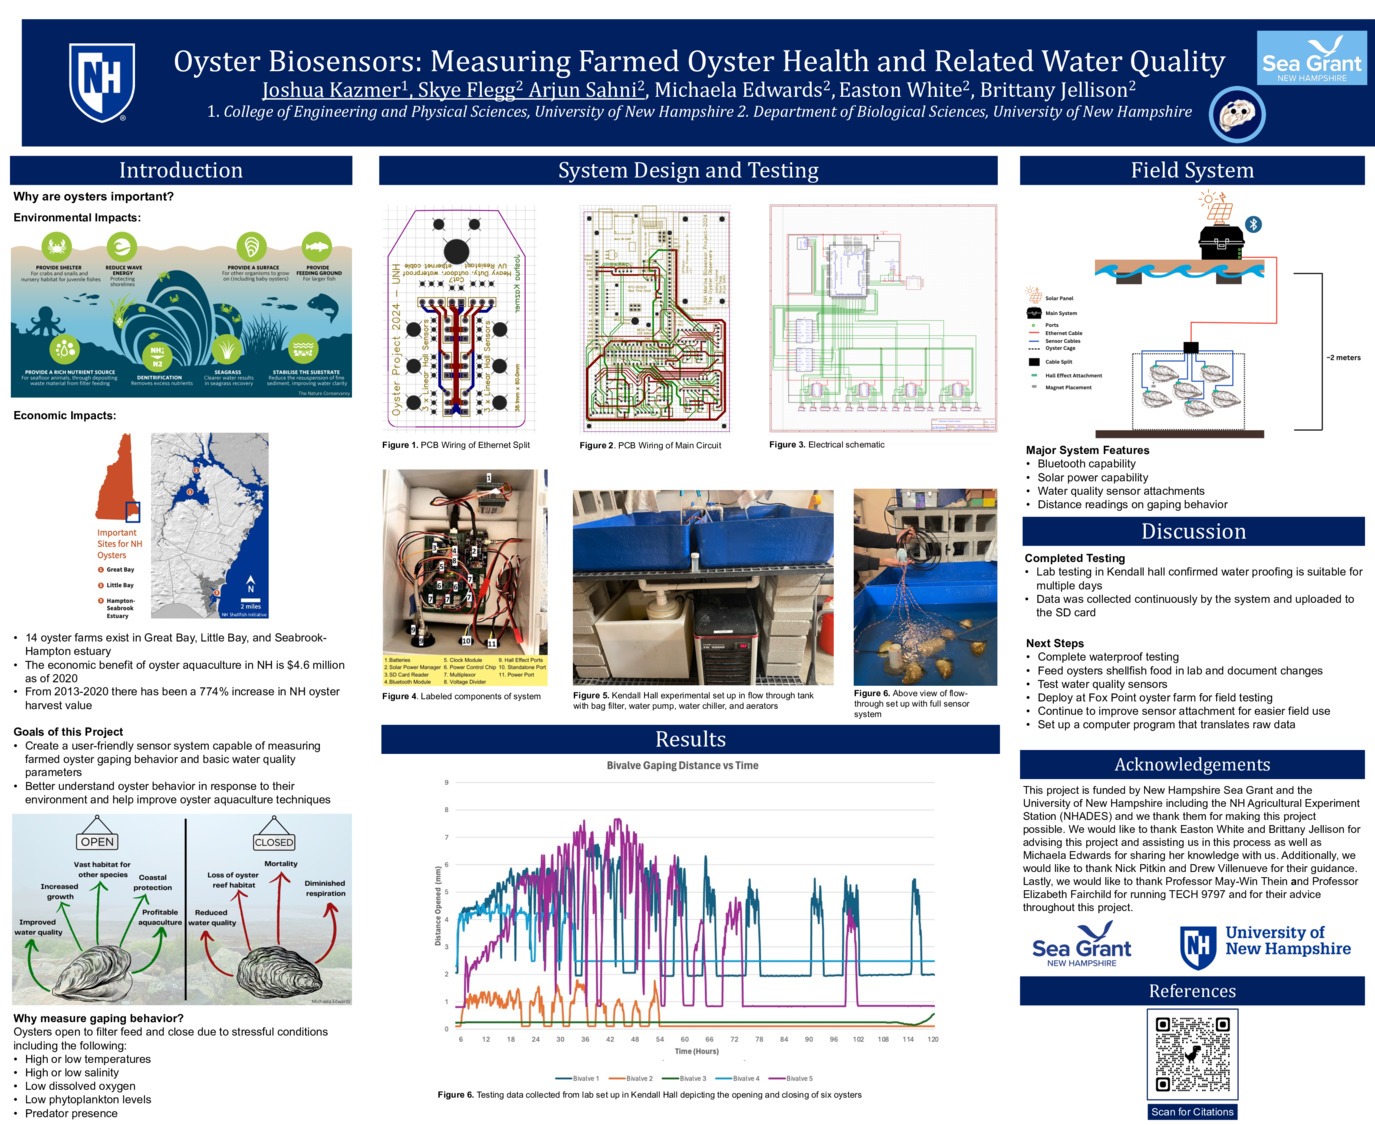 Oyster Biosensors: Measuring Farmed Oyster Health And Related Water Quality by smf1100